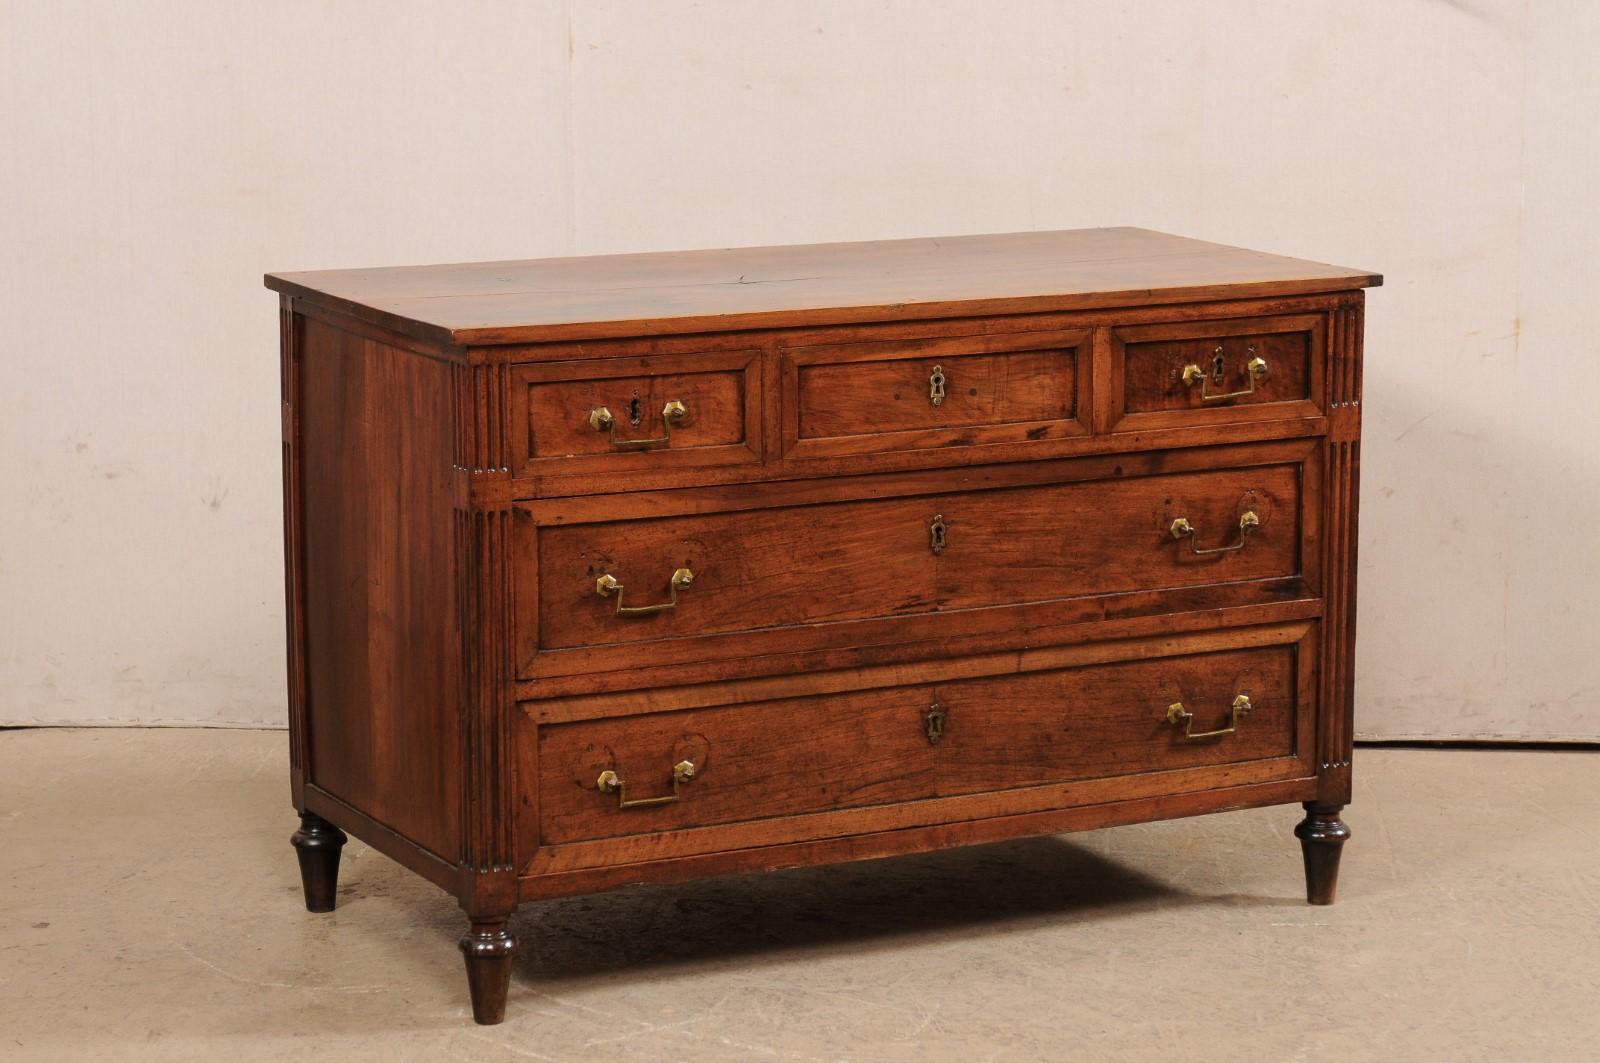 A French neoclassical style carved walnut chest of drawers from the mid 19th century. This antique commode from France features a rectangular-shaped top, above a neoclassical case which houses three small-sized drawers set horizontally over a pair